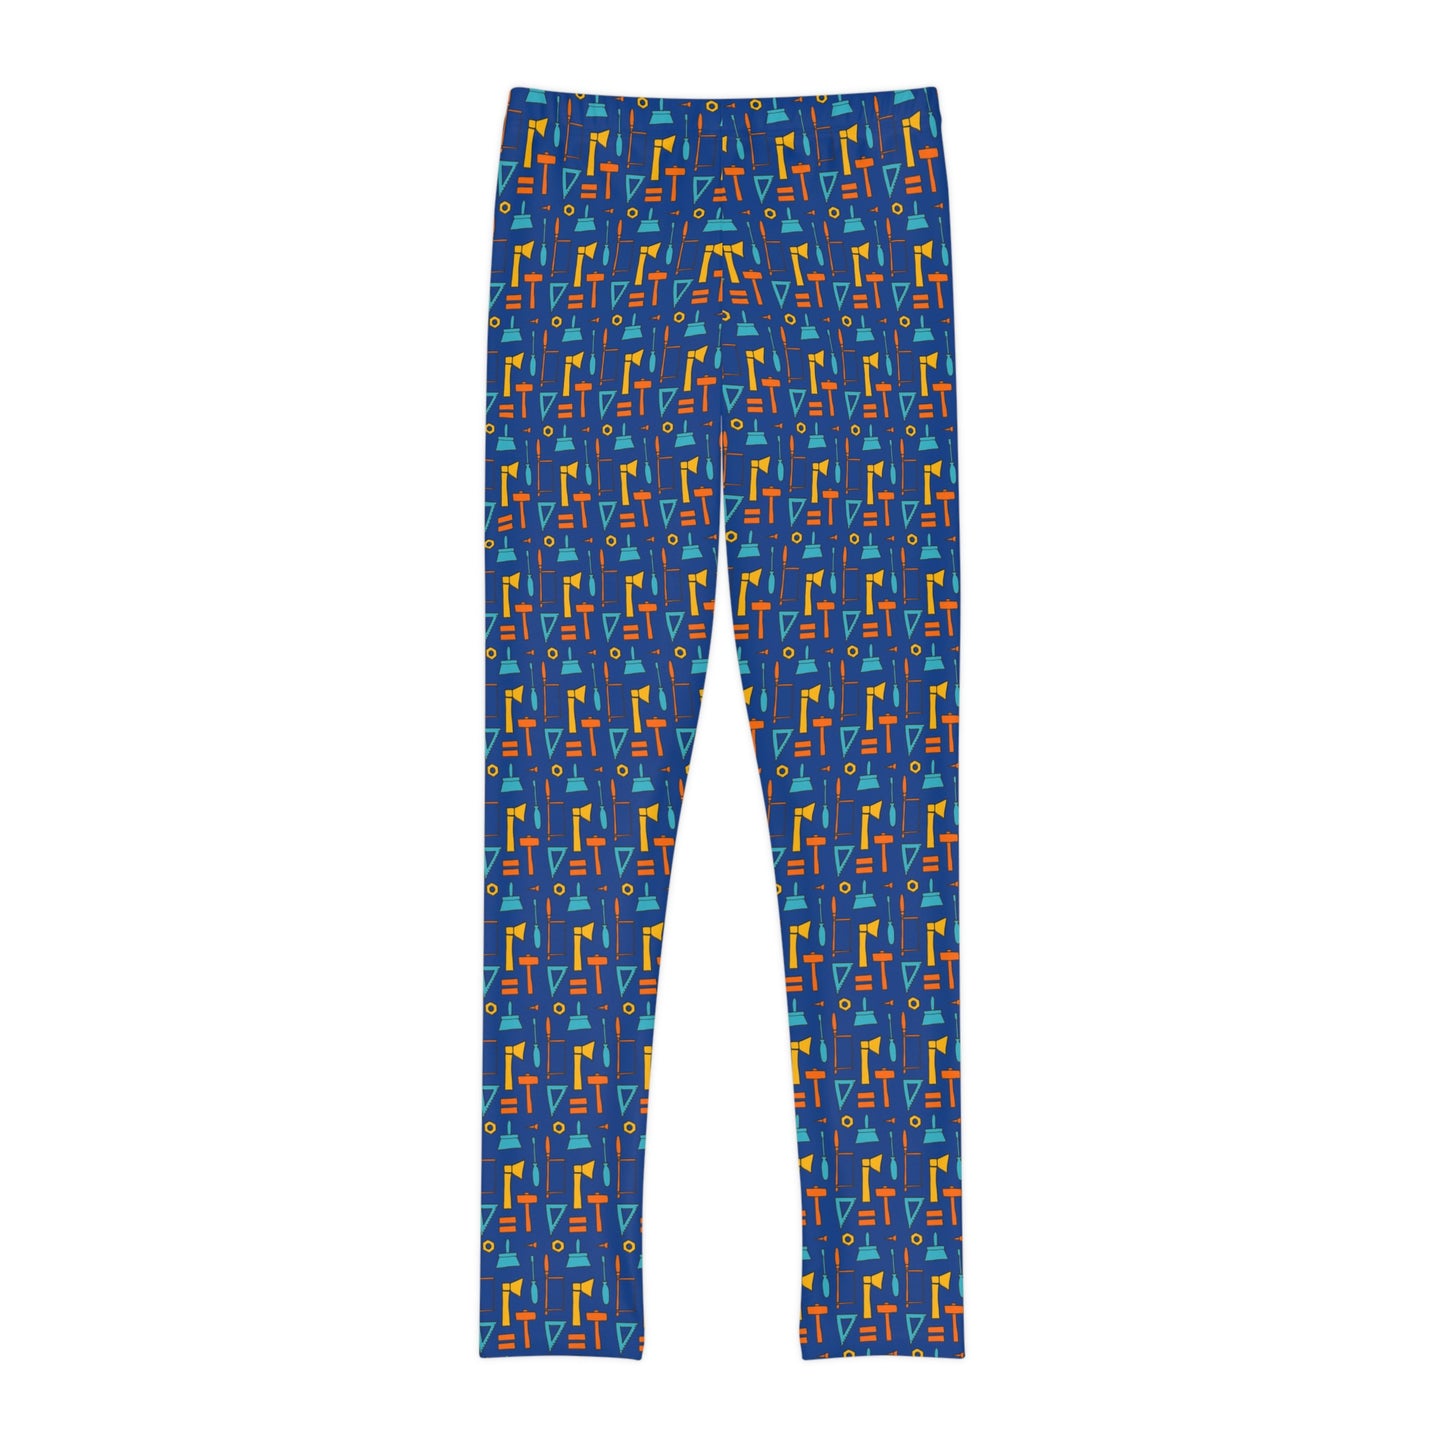 Construction tools, workshop tools Youth Full-Length Leggings